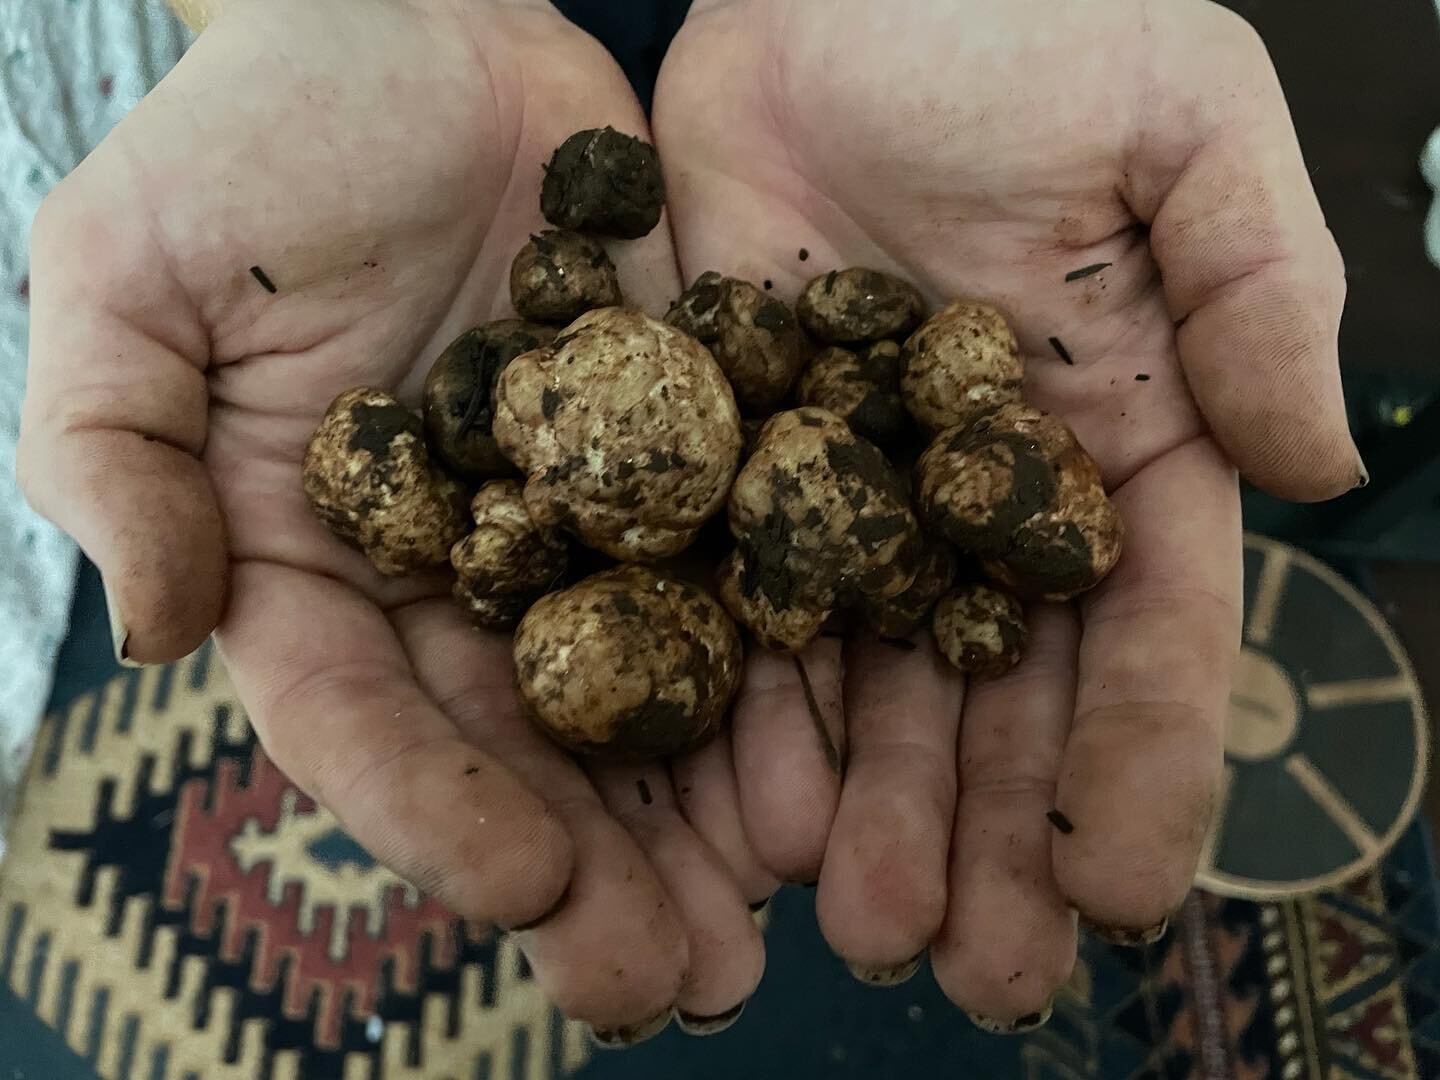 Looks like it&rsquo;s that time of year where the Oregon White Truffles (tuber oregonense) are in season! 🙂🙃🙂
Message if you&rsquo;re interested in purchasing any! 
They won&rsquo;t be around long!

Big shout out to my truffle teacher @sen_dwe